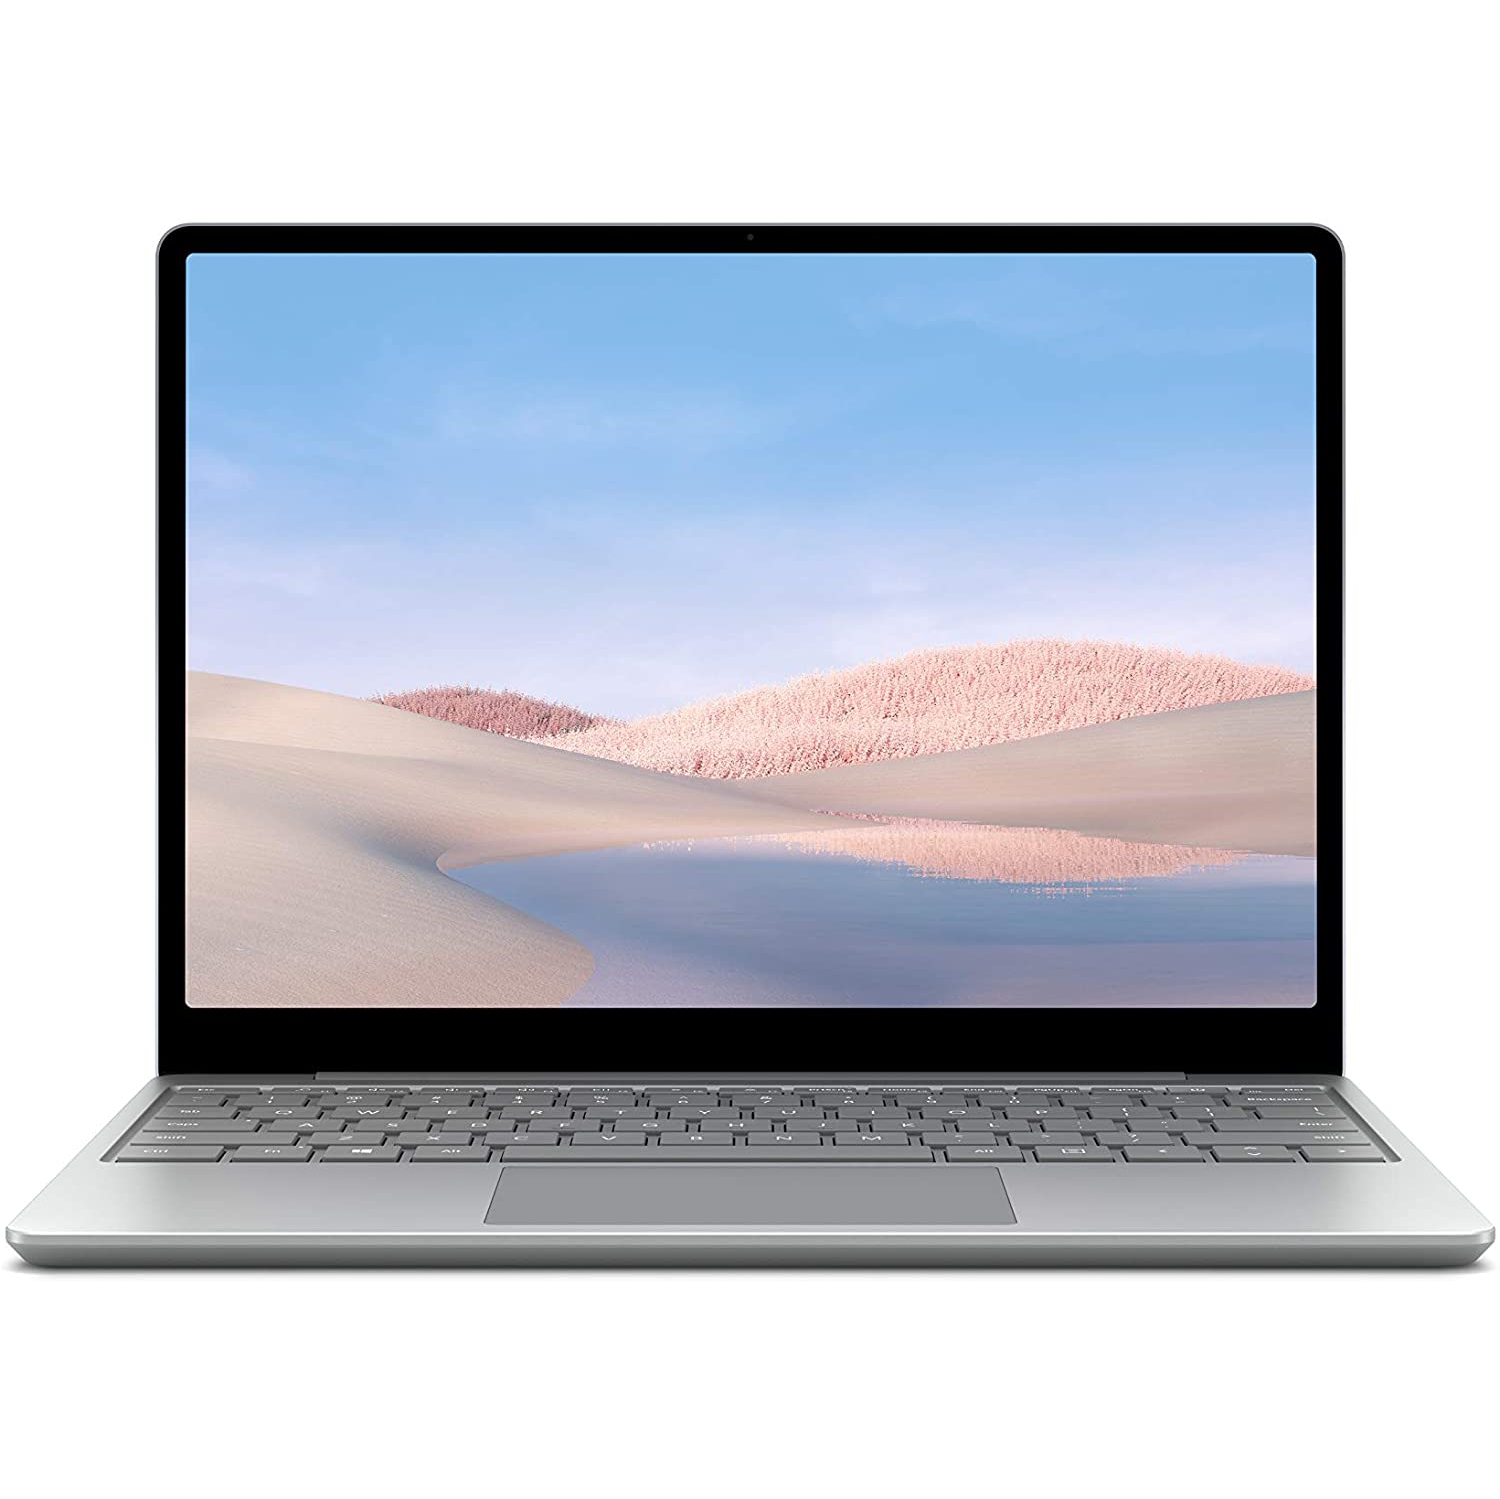 Refurbished (Excellent) - Microsoft Surface Laptop Go 12.4in Touchscreen - 64GB SSD - Intel Core i5-1035G1 Processor - Platinum - Certified Refurbished